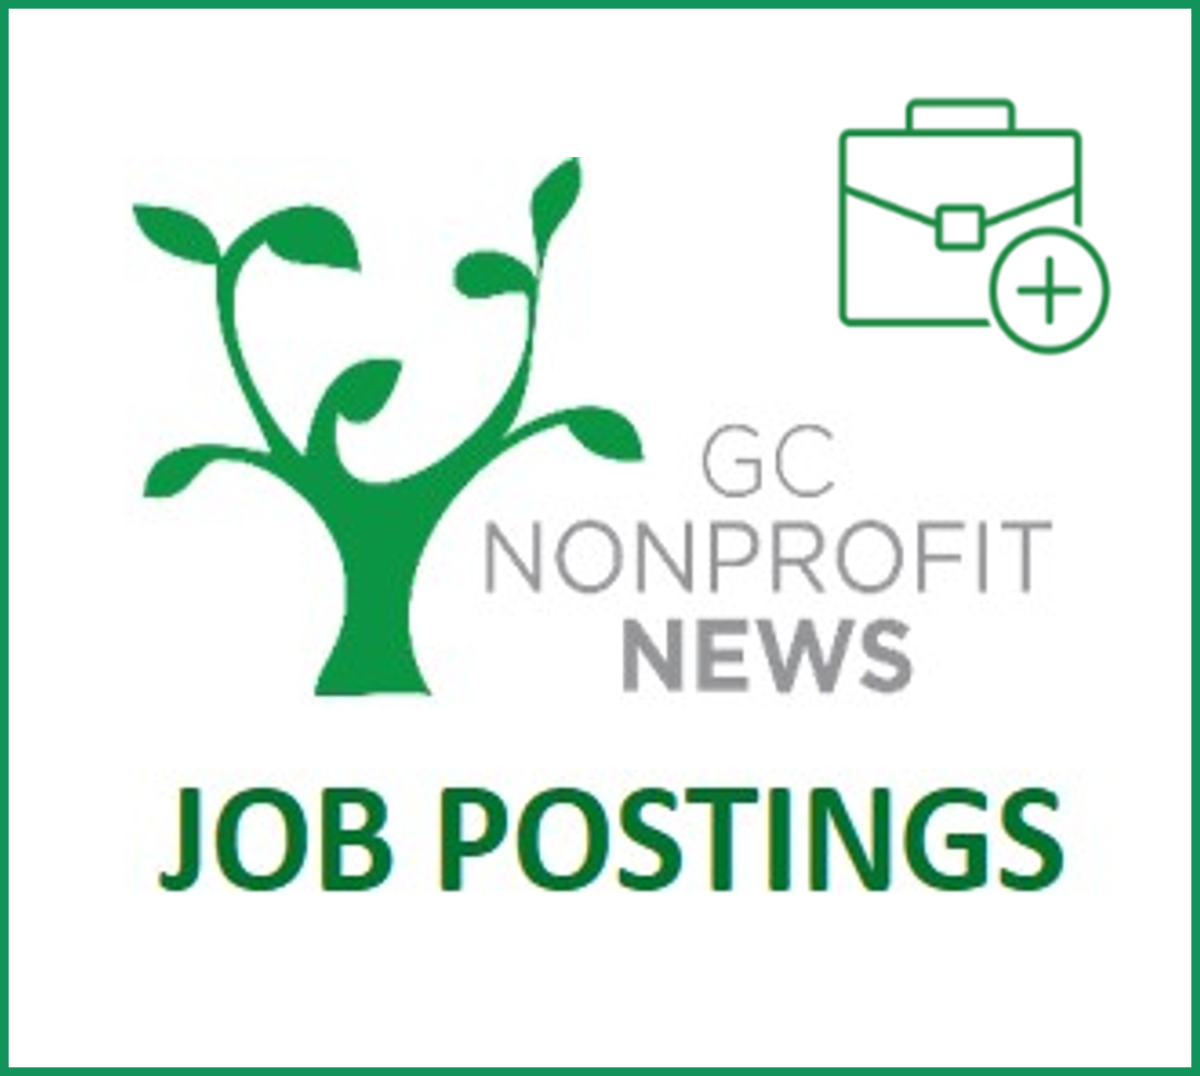 Your Special GC Nonprofit News Jobs Issue